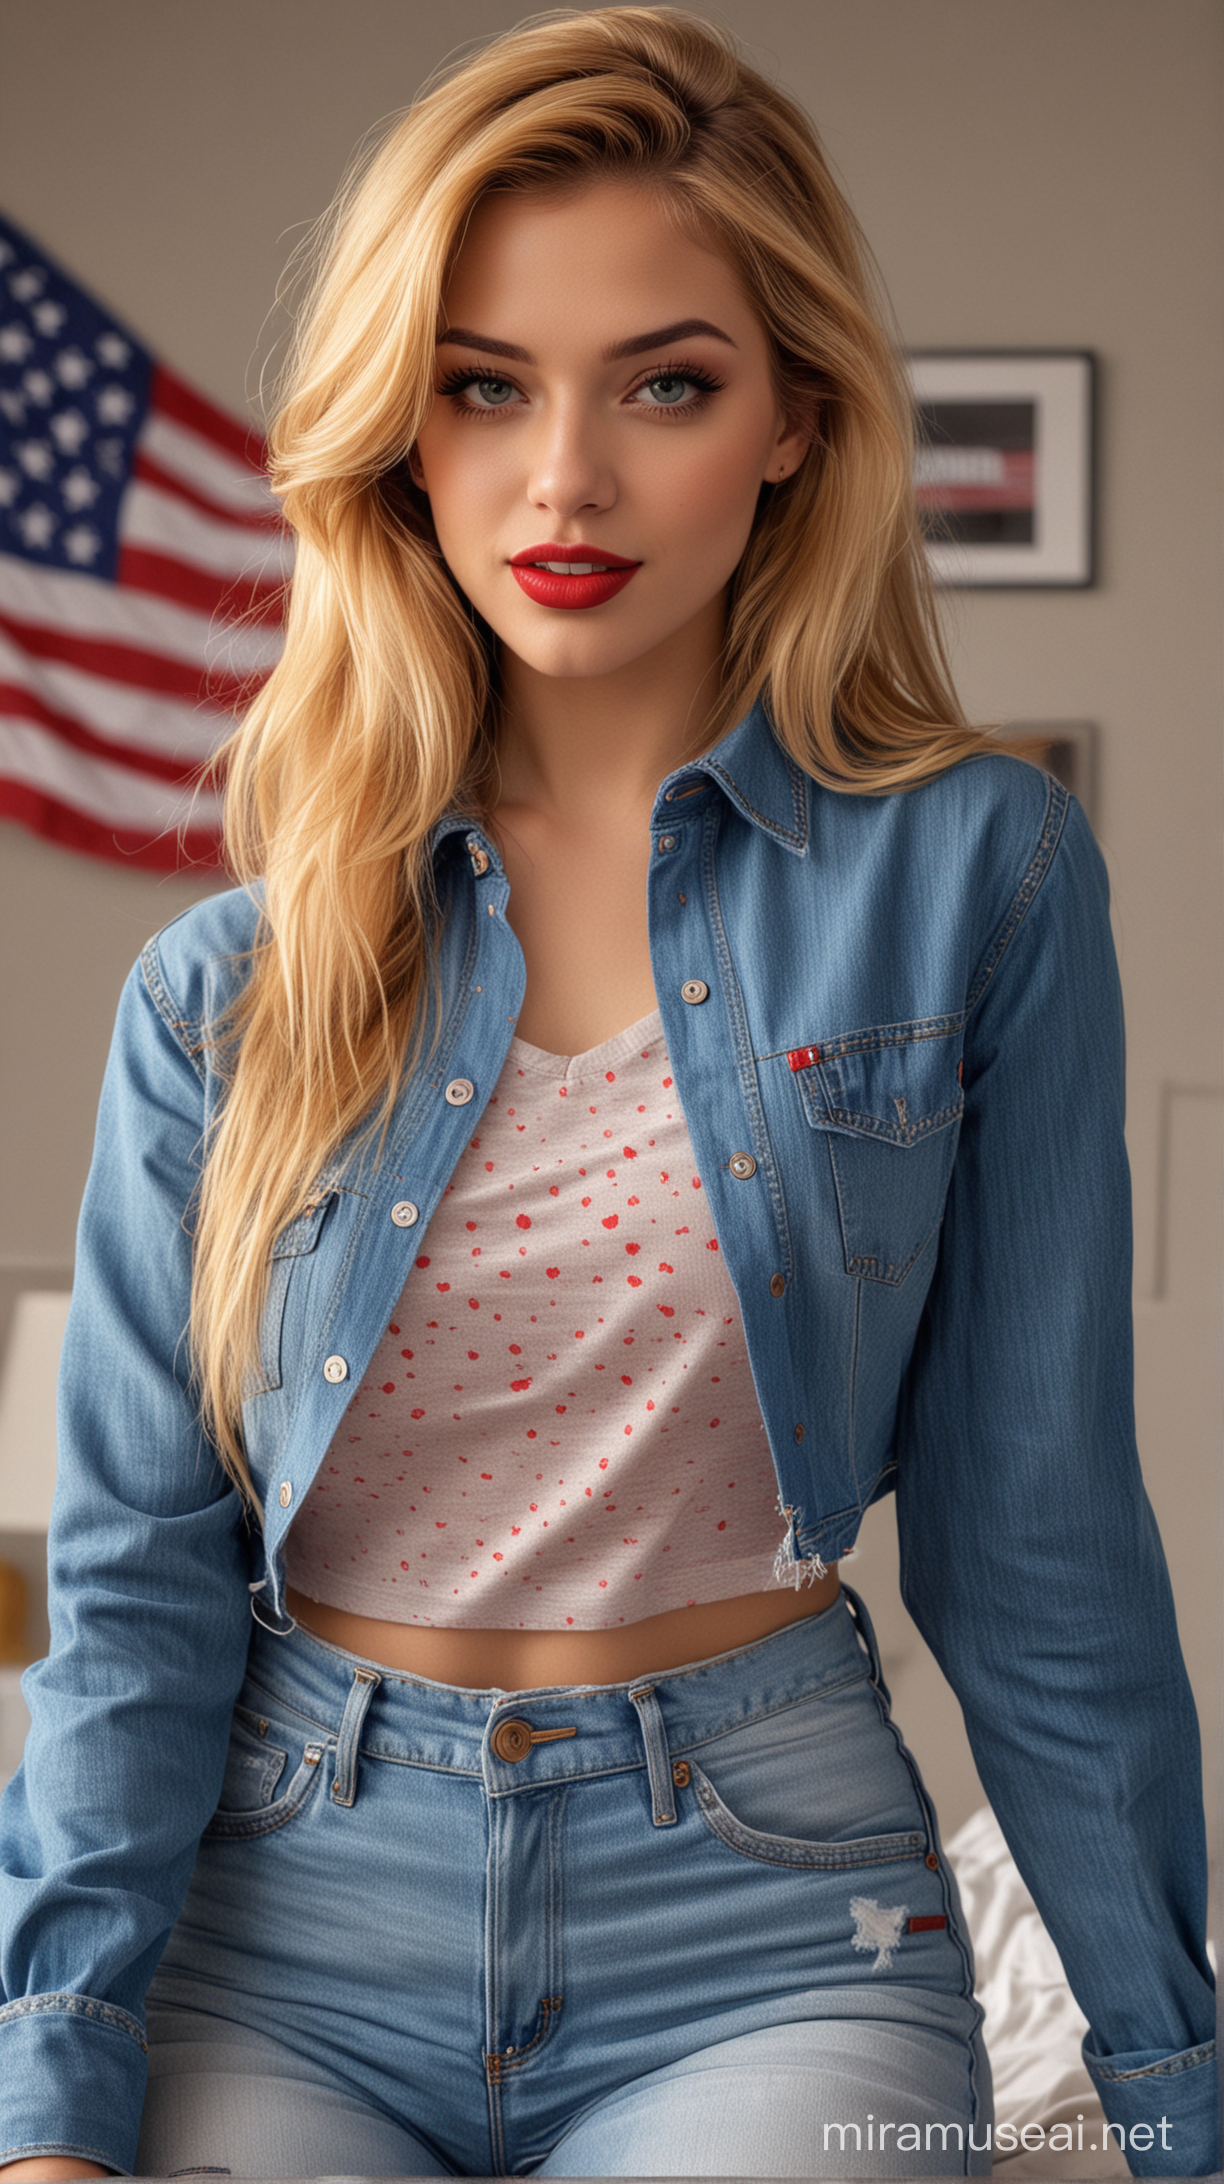 Stylish American Woman with Golden Hair and Red Lipstick in Casual Attire at Home